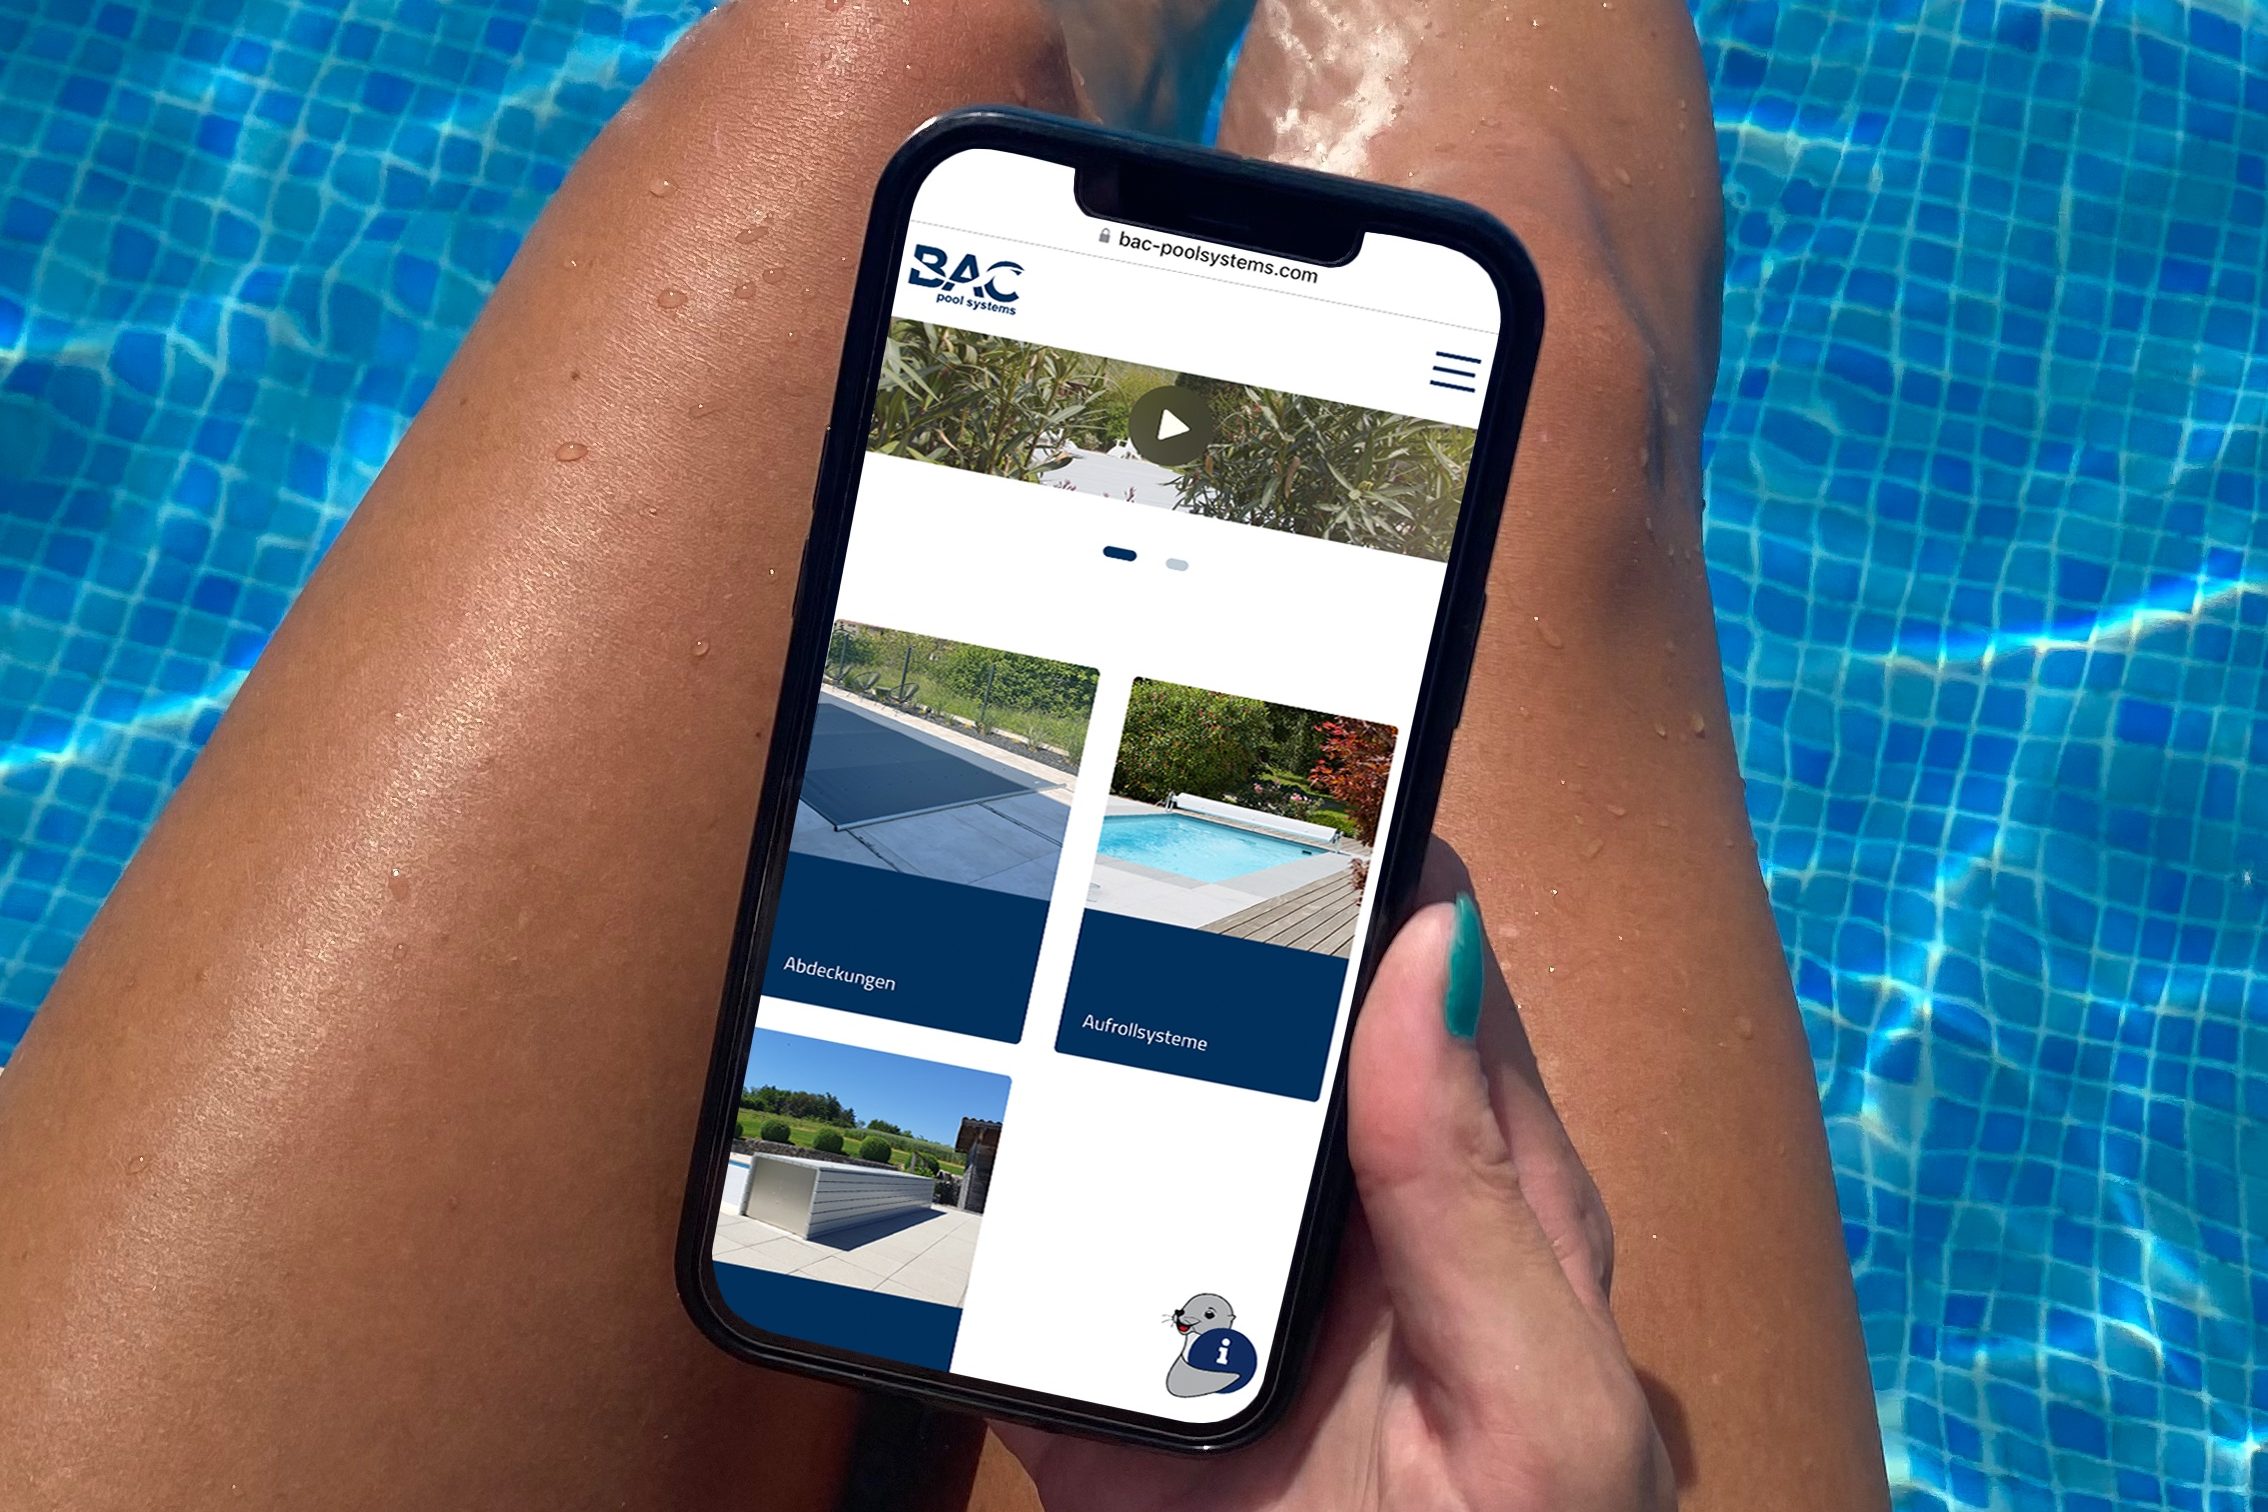 BAC pool systems new homepage